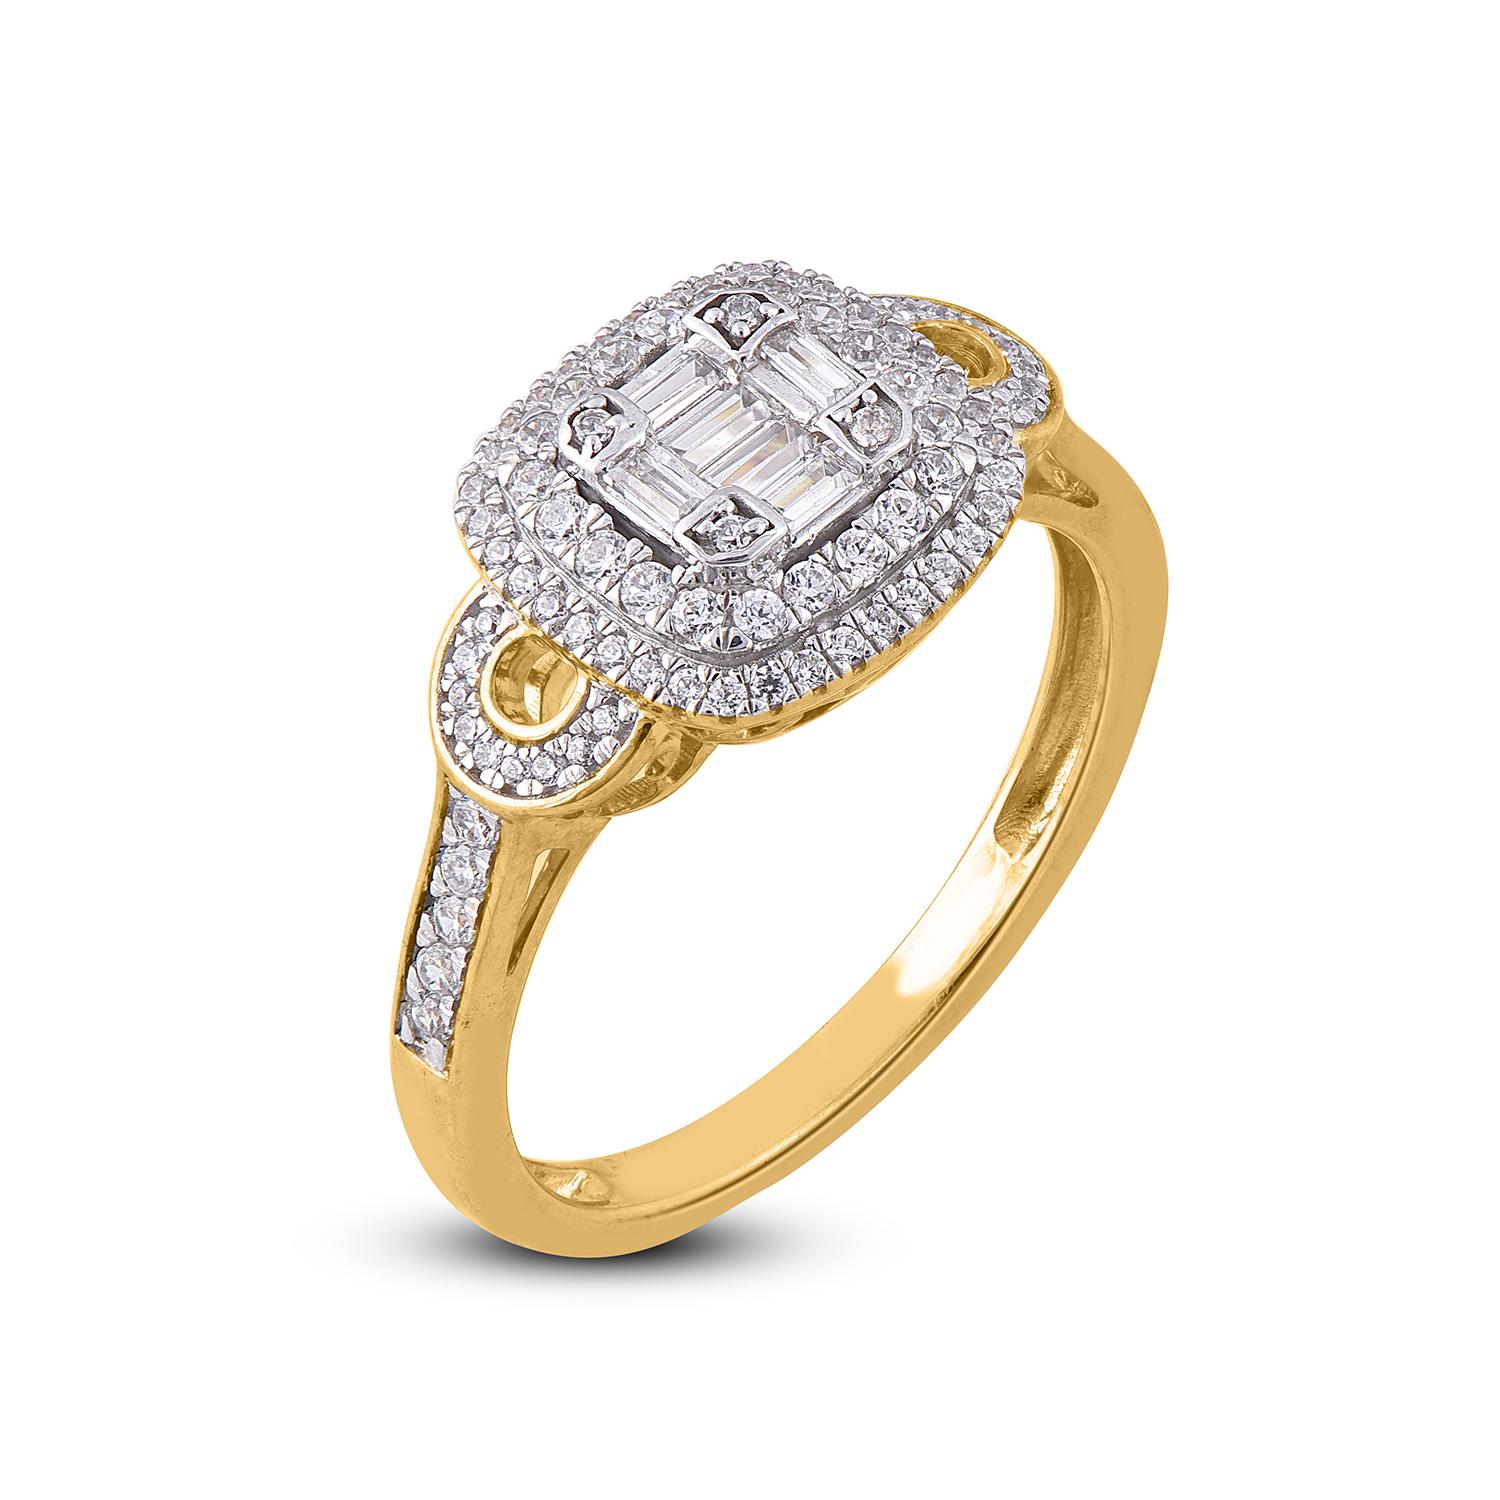 This Cushion shape diamond ring is sure to be admired for the inherent classic beauty and elegance within its design. The total weight of diamonds 0.50 carat, H-I color, I2 Clarity. This ring is beautifully crafted in 14 Karat Yellow Gold and